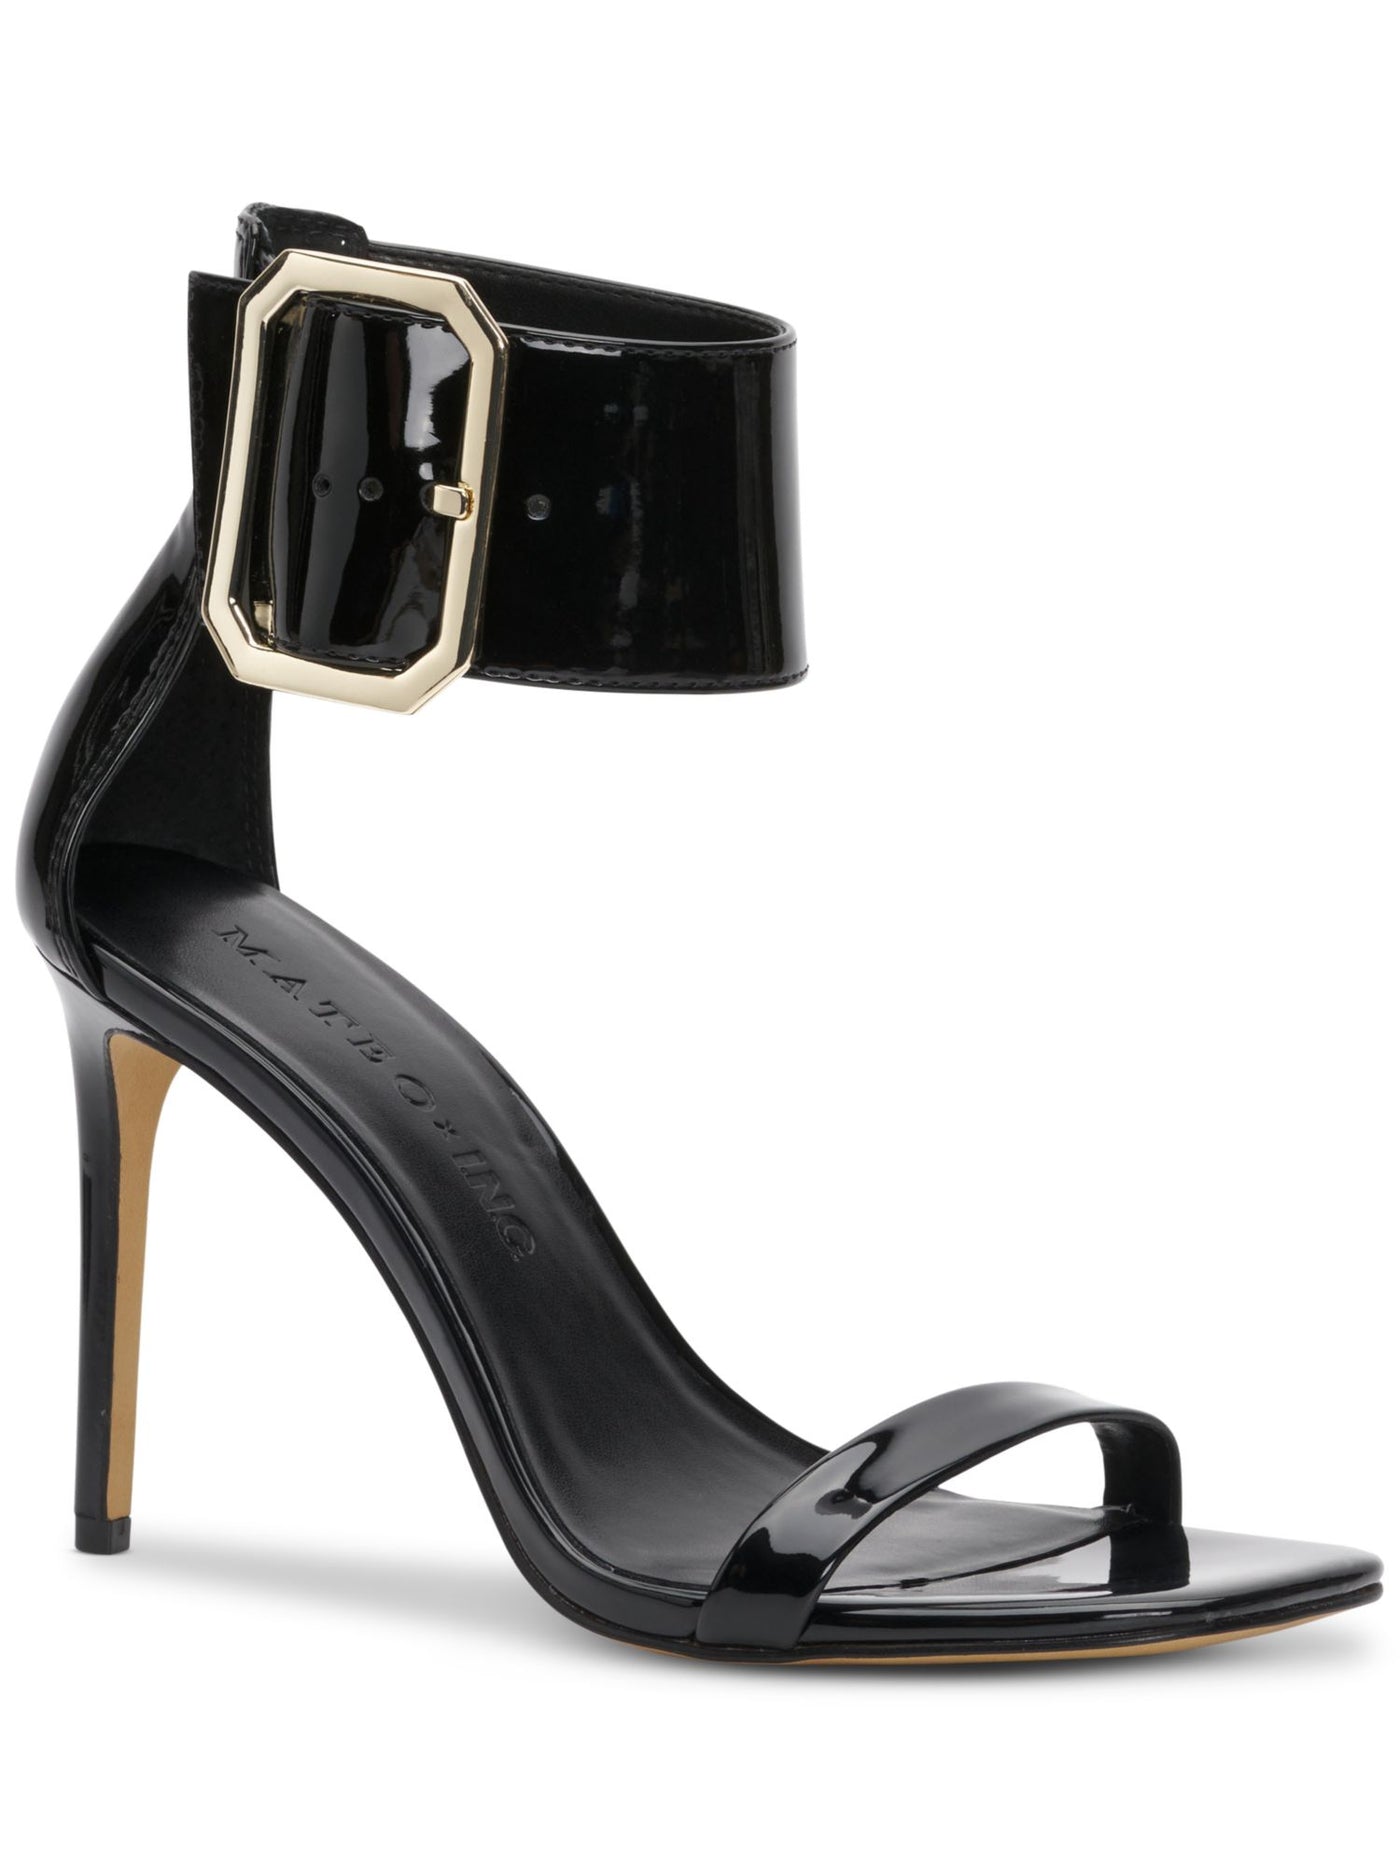 MATEO BY INC Womens Black Ankle Strap Padded Melodie Square Toe Stiletto Buckle Dress Heeled Sandal 6.5 M